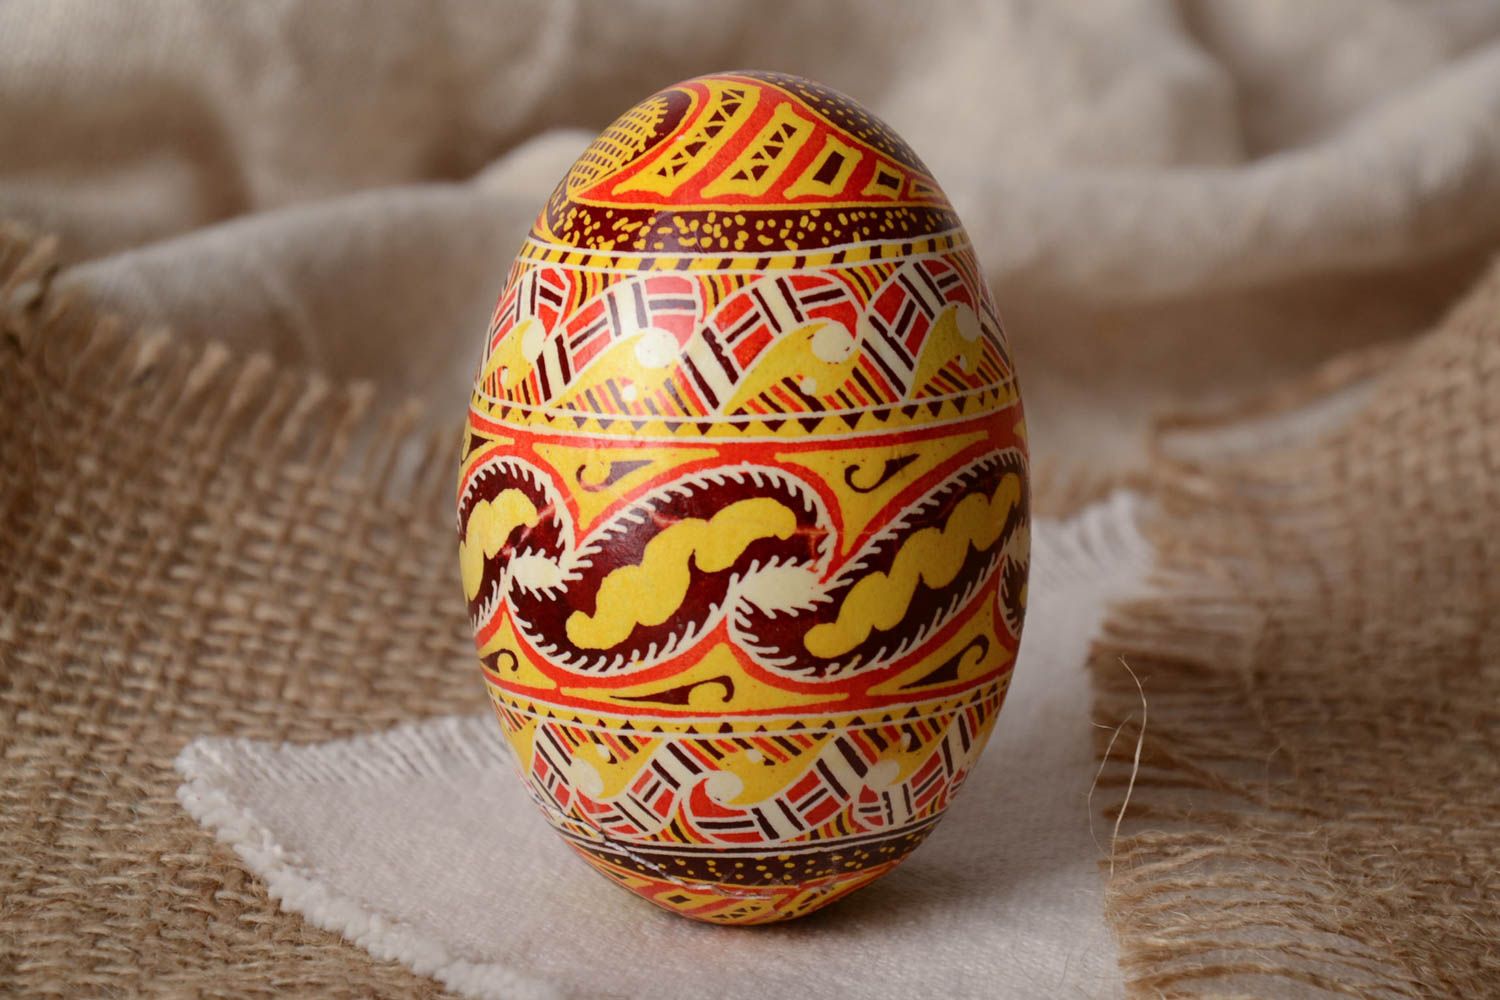 Homemade designer decorative Easter egg pysanka painted with wax and aniline dyes photo 1